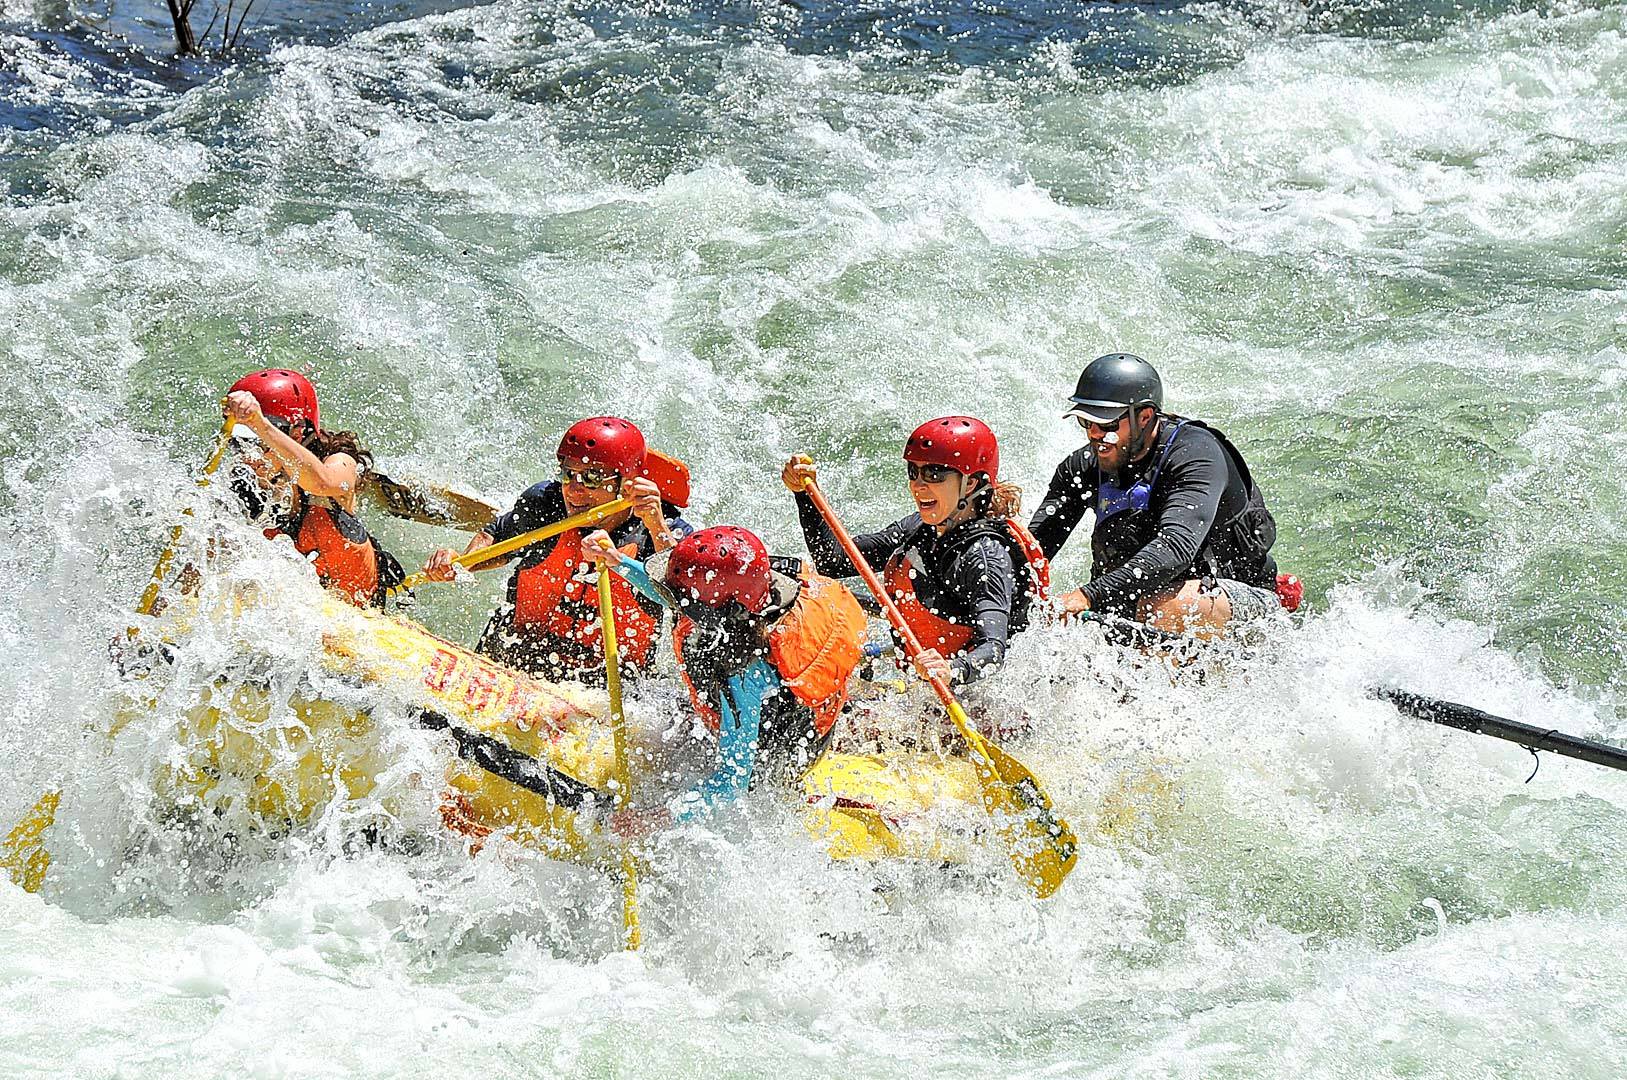 What you need to know about high-water rafting trips in the West